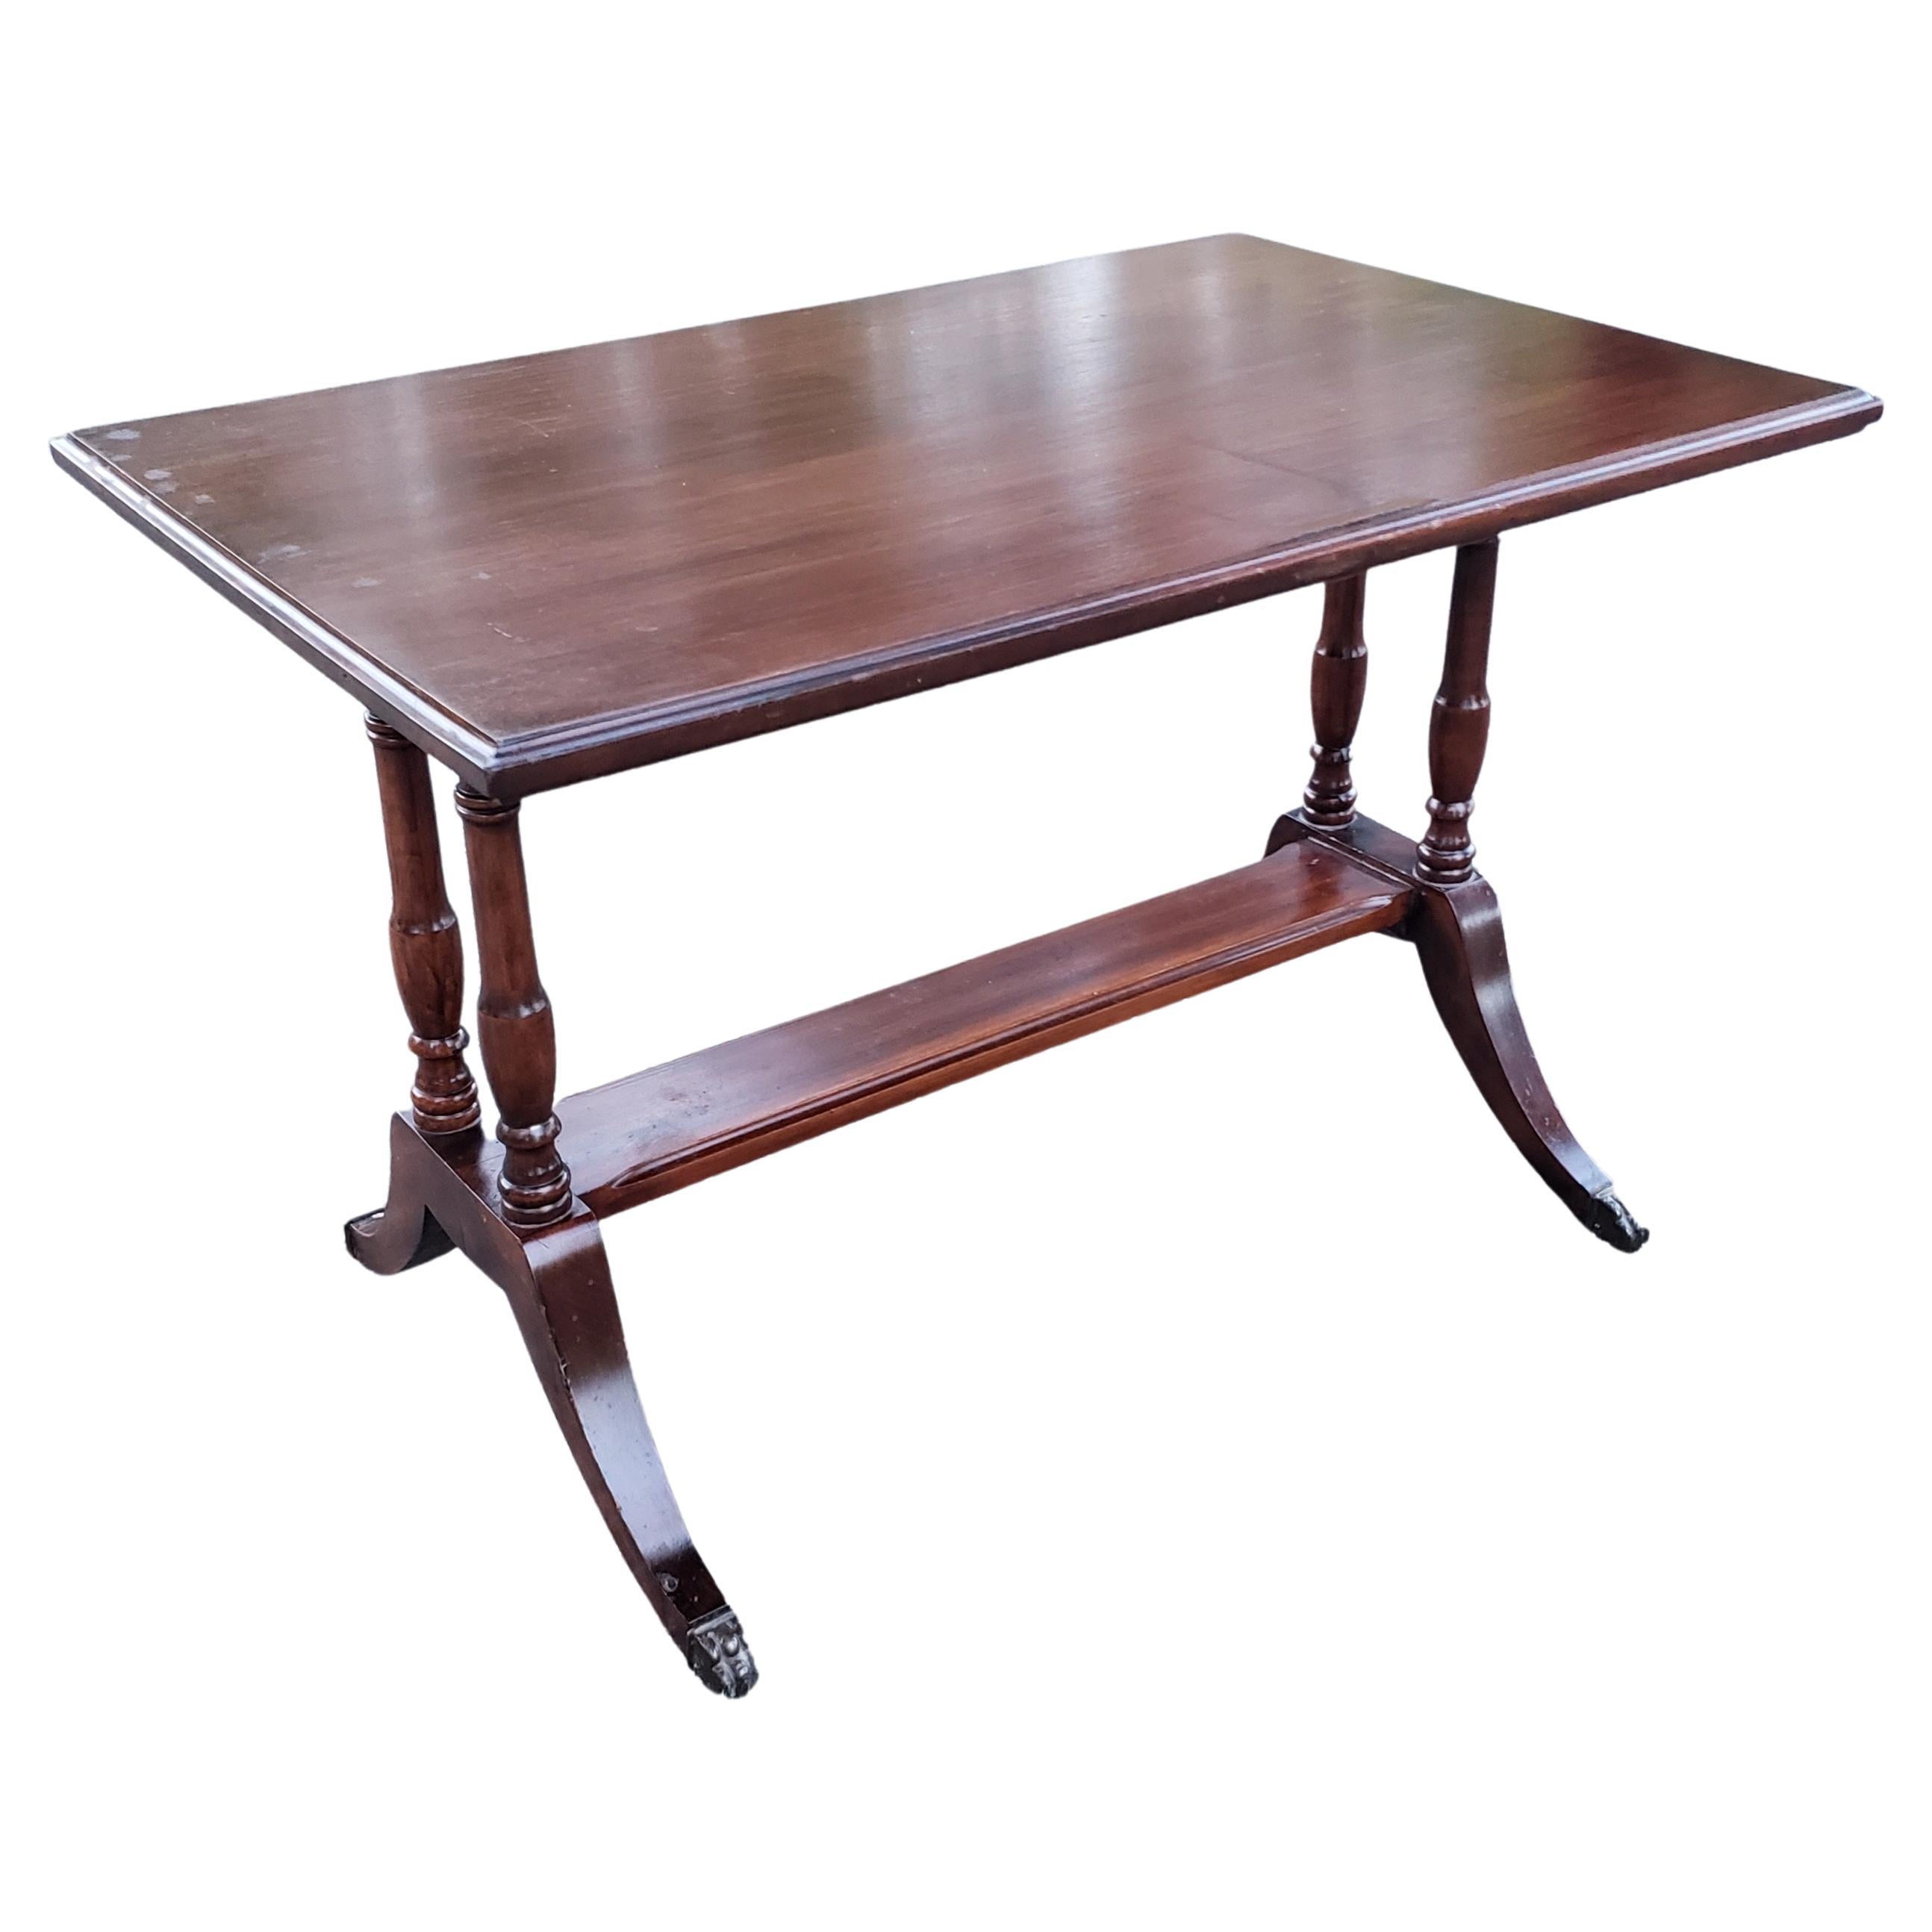 Vintage Small Space American Mahogany Tea / Coffee Table, circa 1930s For Sale